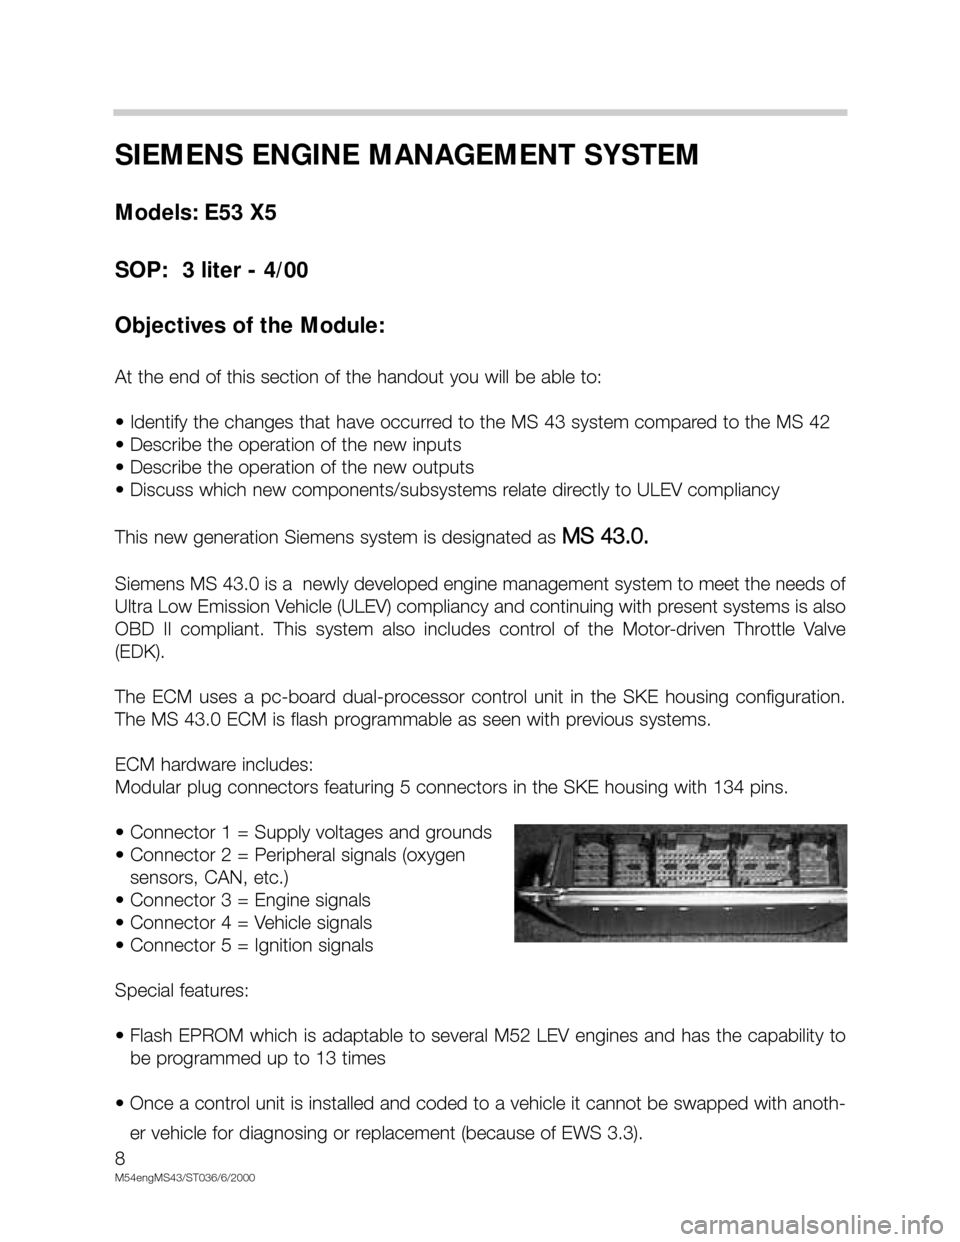 BMW X5 2006 E53 M54 Engine Workshop Manual 8
M54engMS43/ST036/6/2000
SIEMENS ENGINE MANAGEMENT SYSTEM
Models: E53 X5
SOP:  3 liter - 4/00
Objectives of the Module:
At the end of this section of the handout you will be able to:
• Identify the